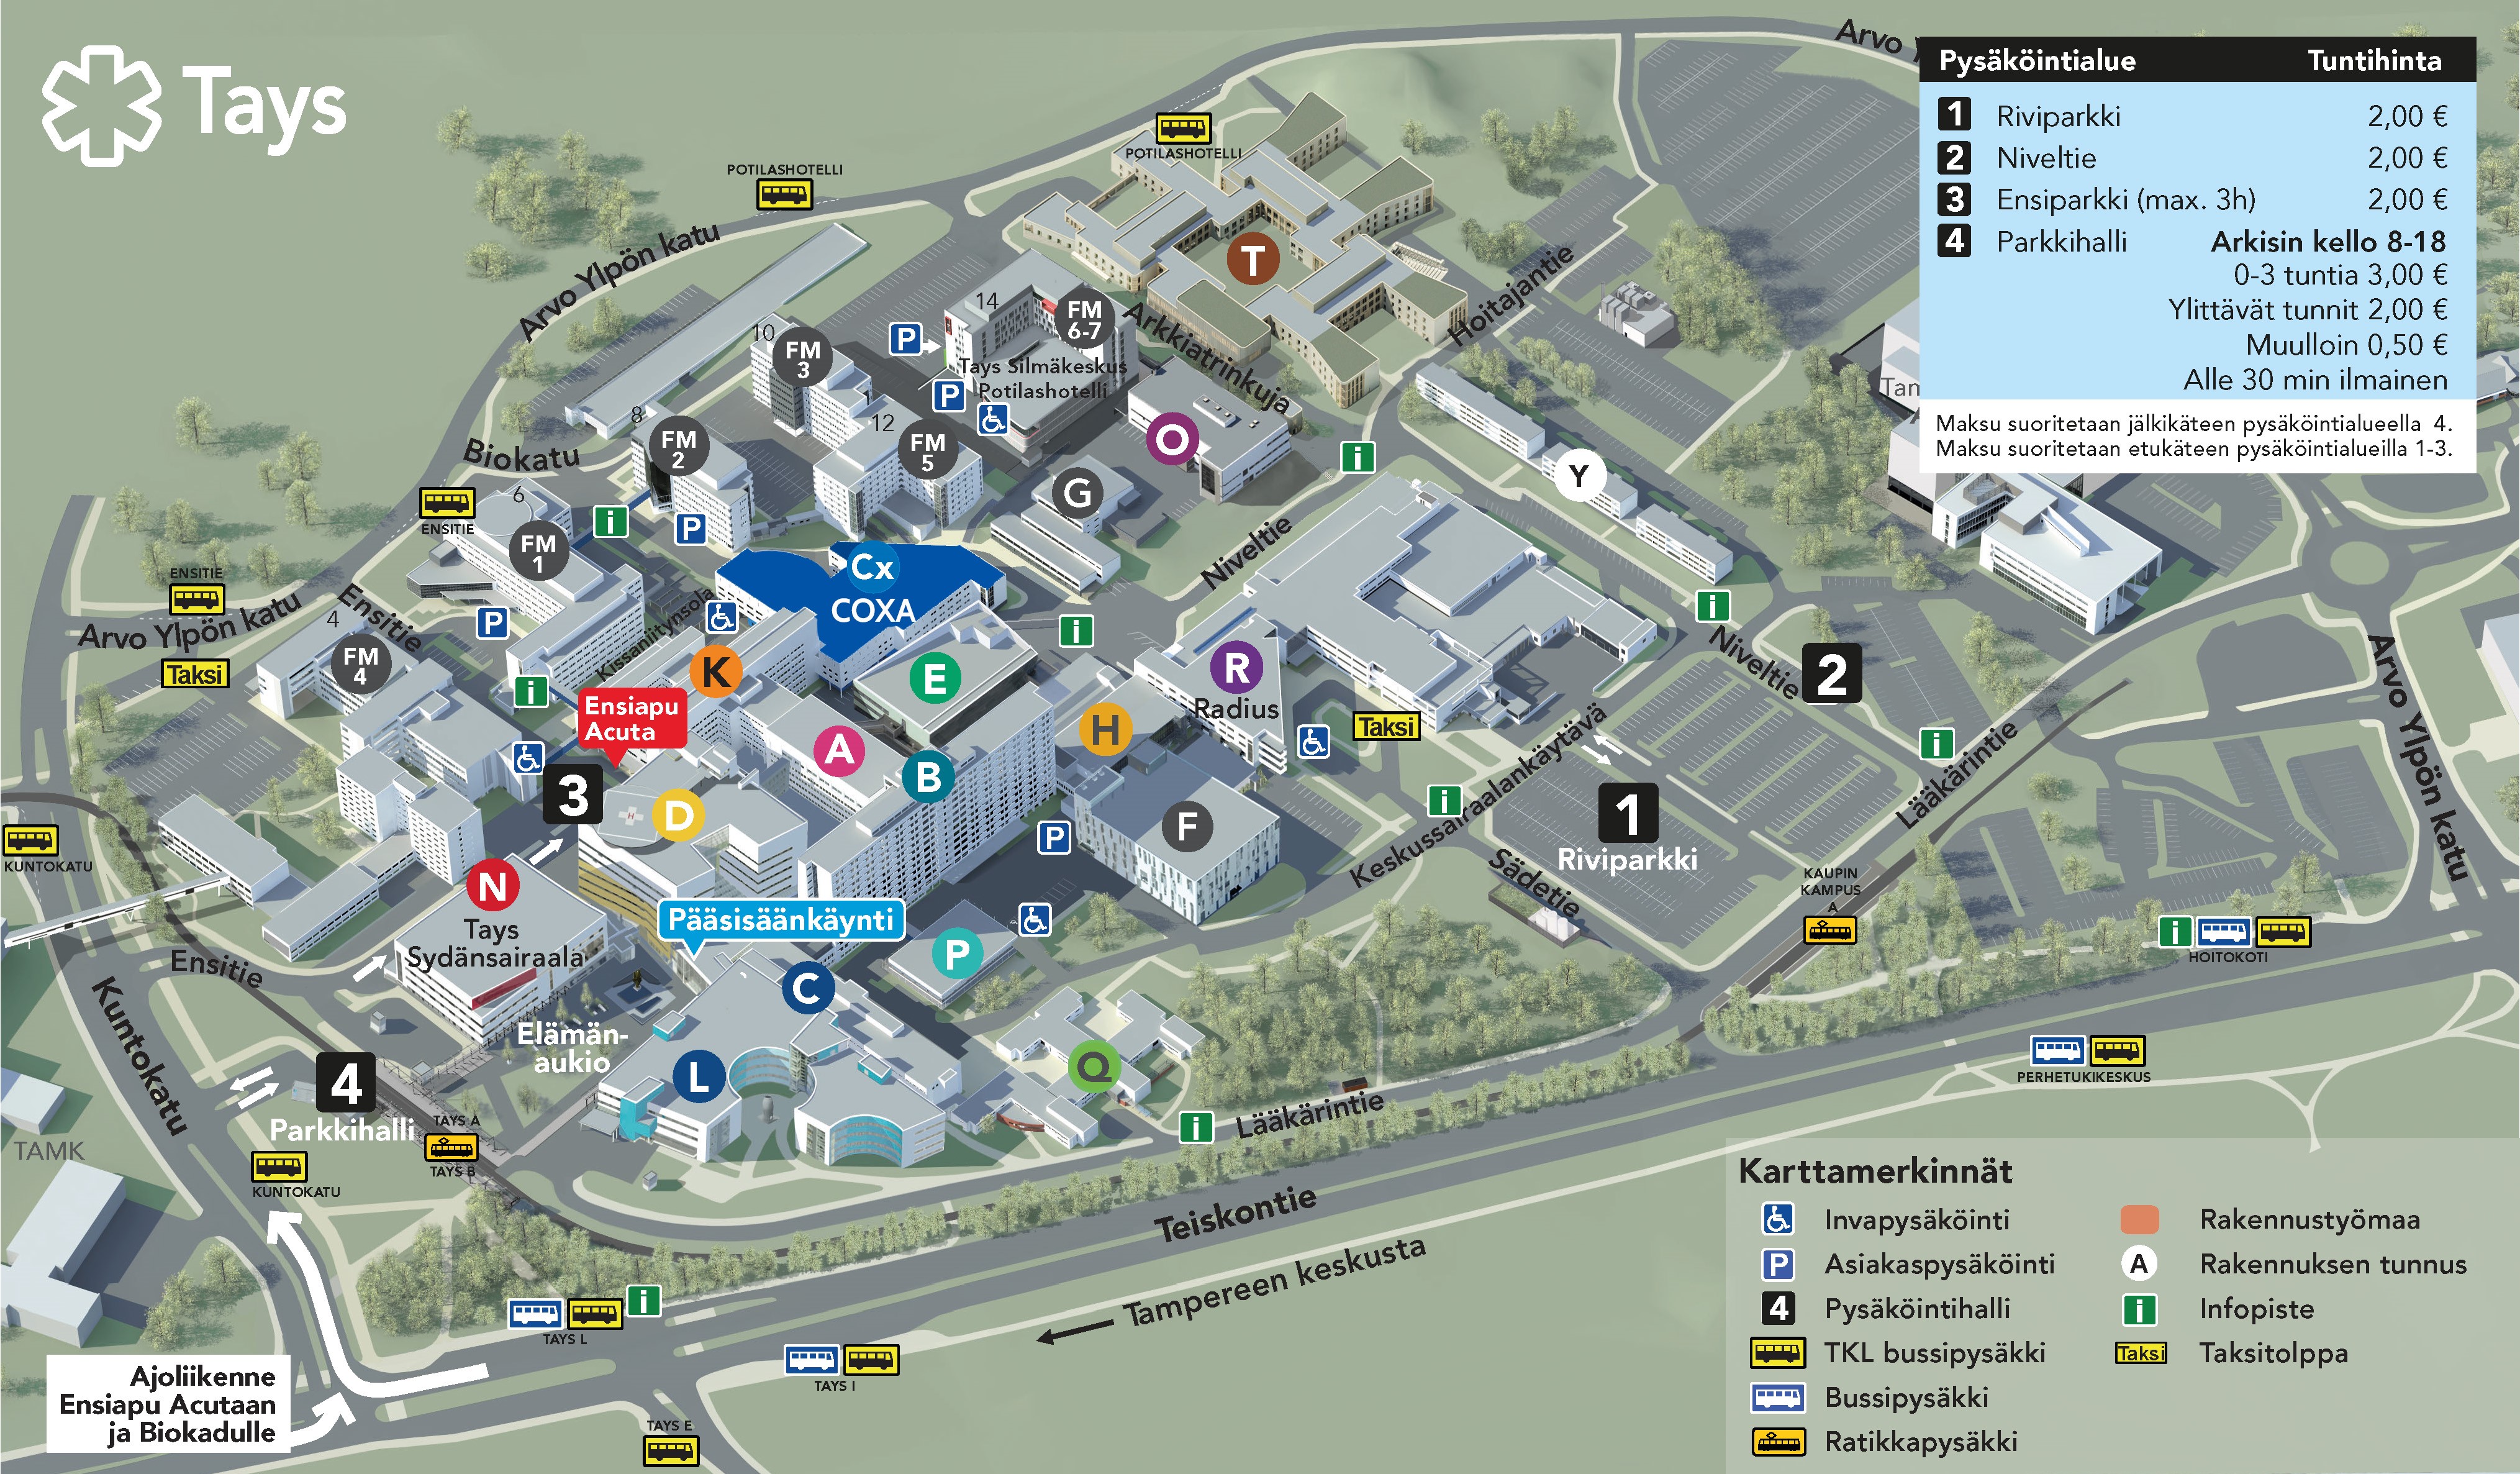 Map of Tays hospital complex in Tampere